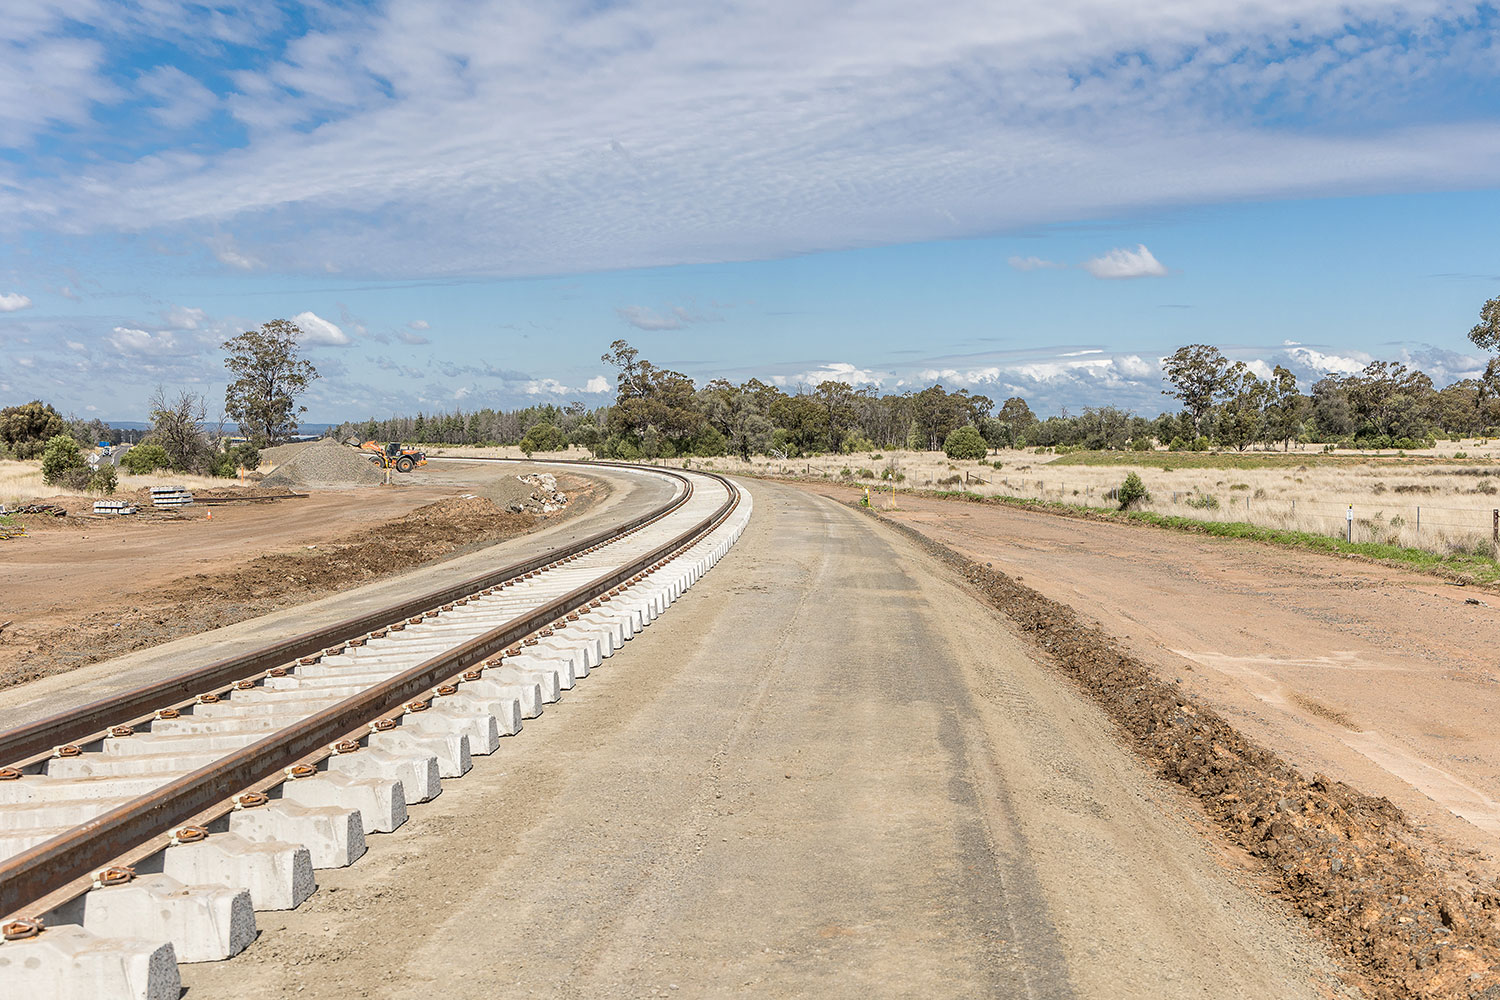 New track and sleepers waiting for ballast, looking south towards Narrabri